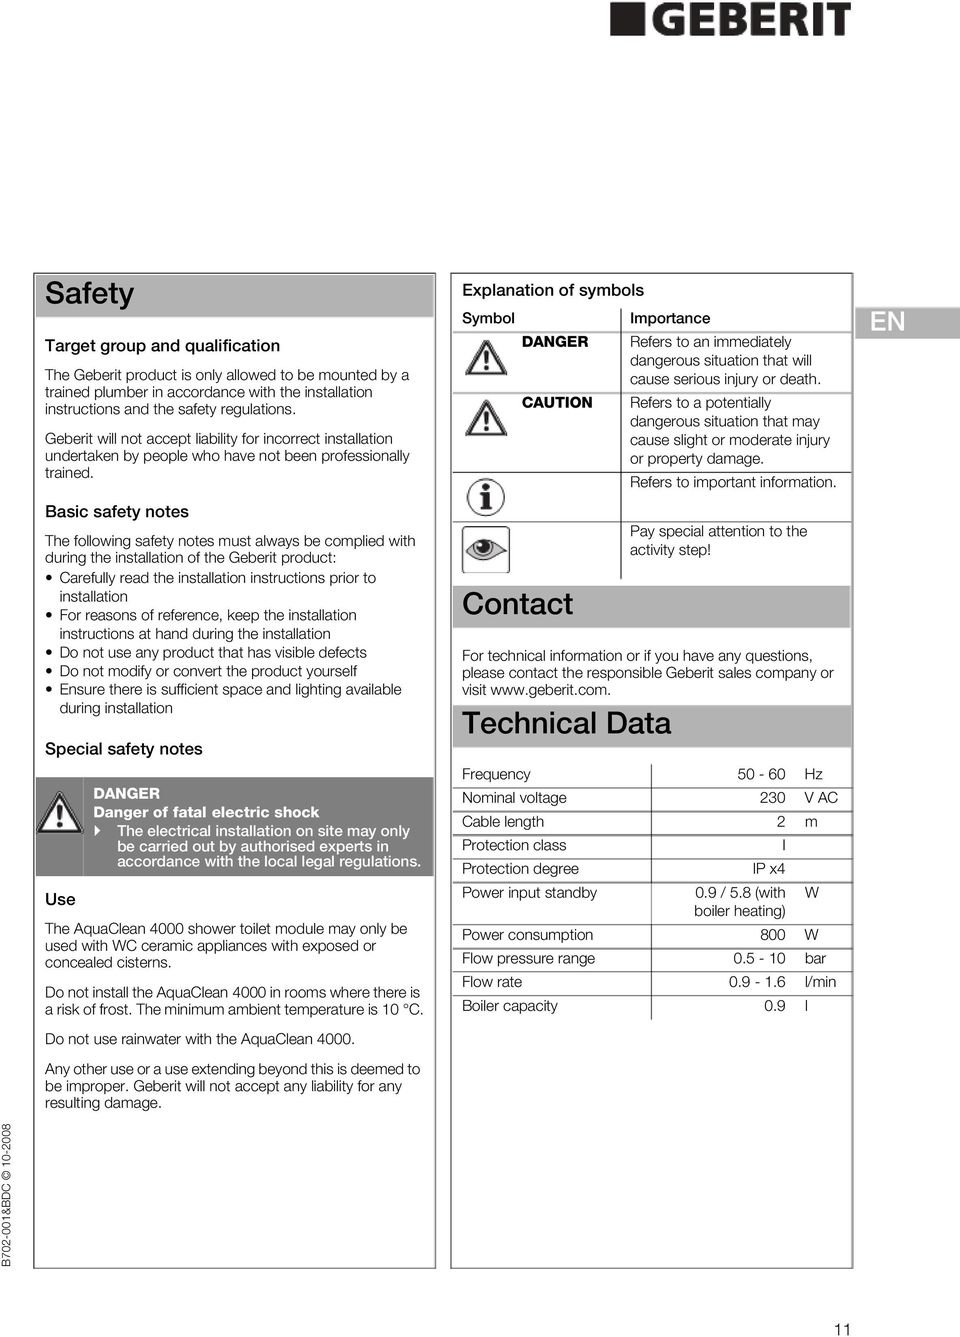 Basic safety notes The following safety notes must always be complied with during the installation of the Geberit product: Carefully read the installation instructions prior to installation For